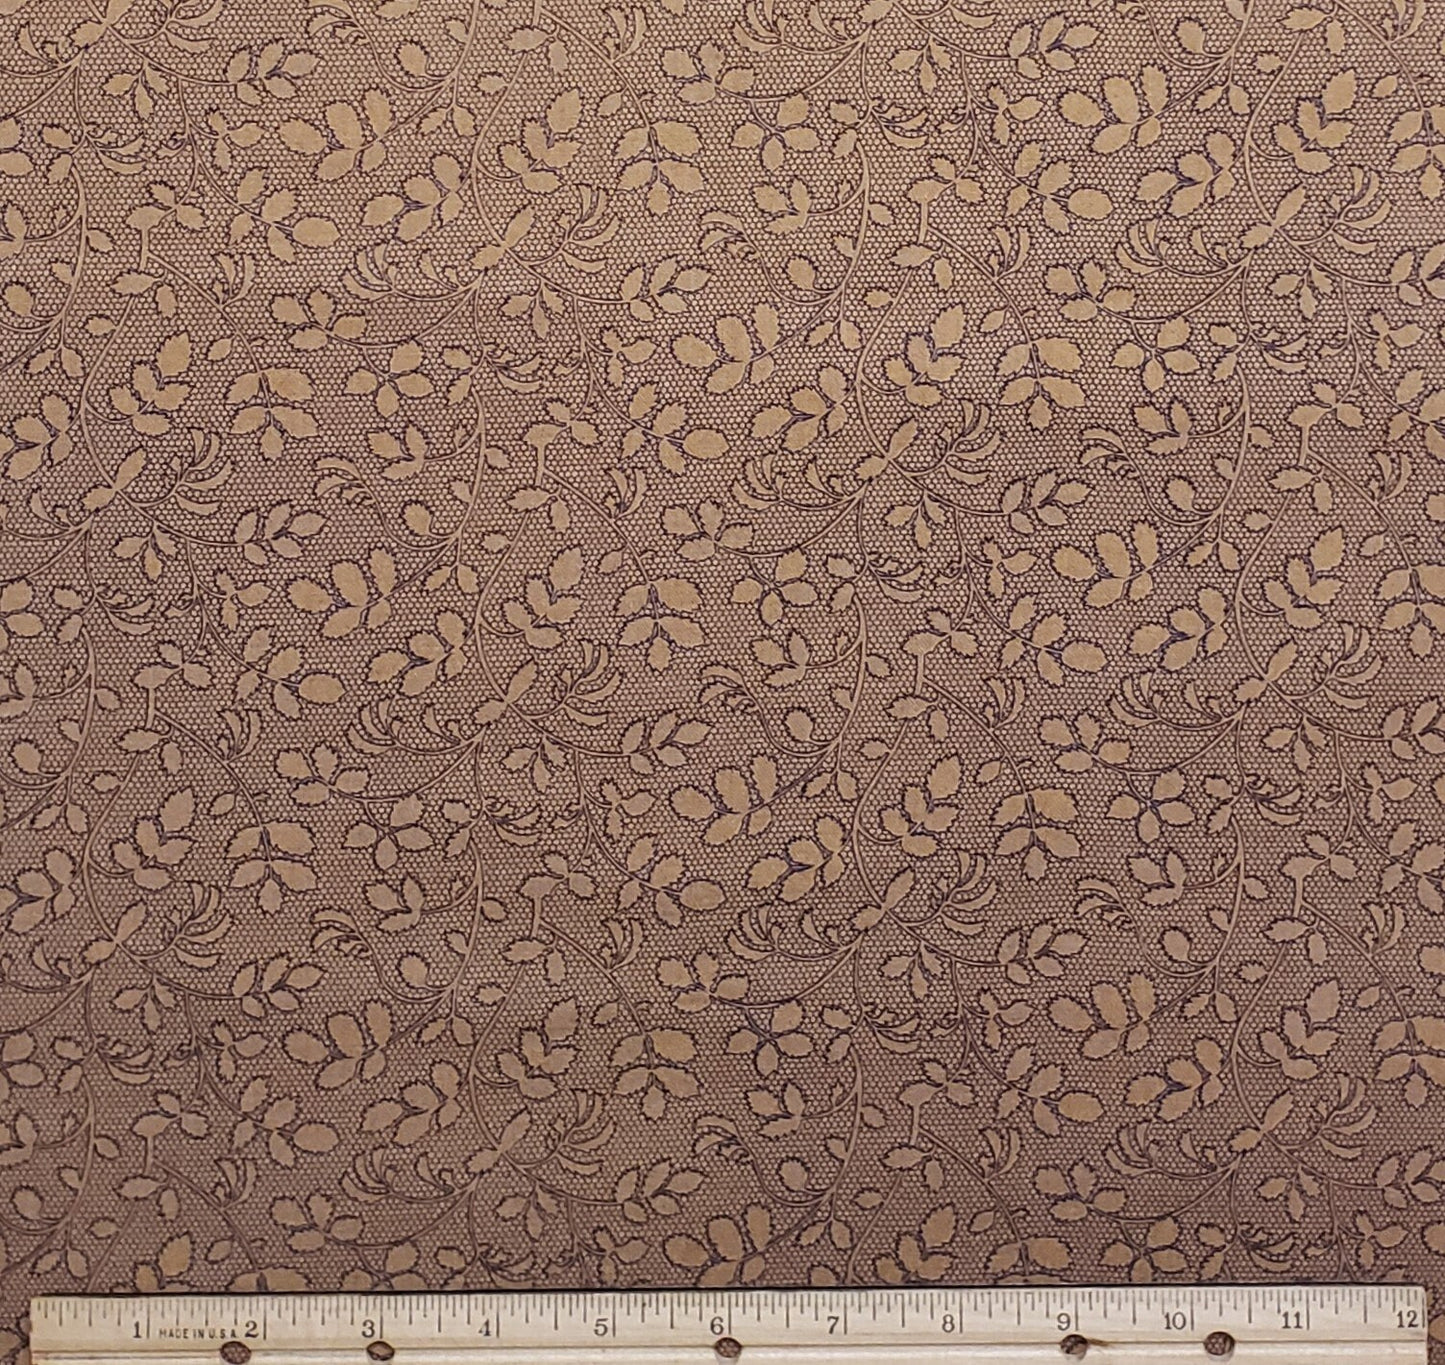 EOB - D# 8348 Shenandoah Collection by Designer's Sketchbook - Tan Fabric / Colonial Style Dark Blue Leaf and Patterned Background